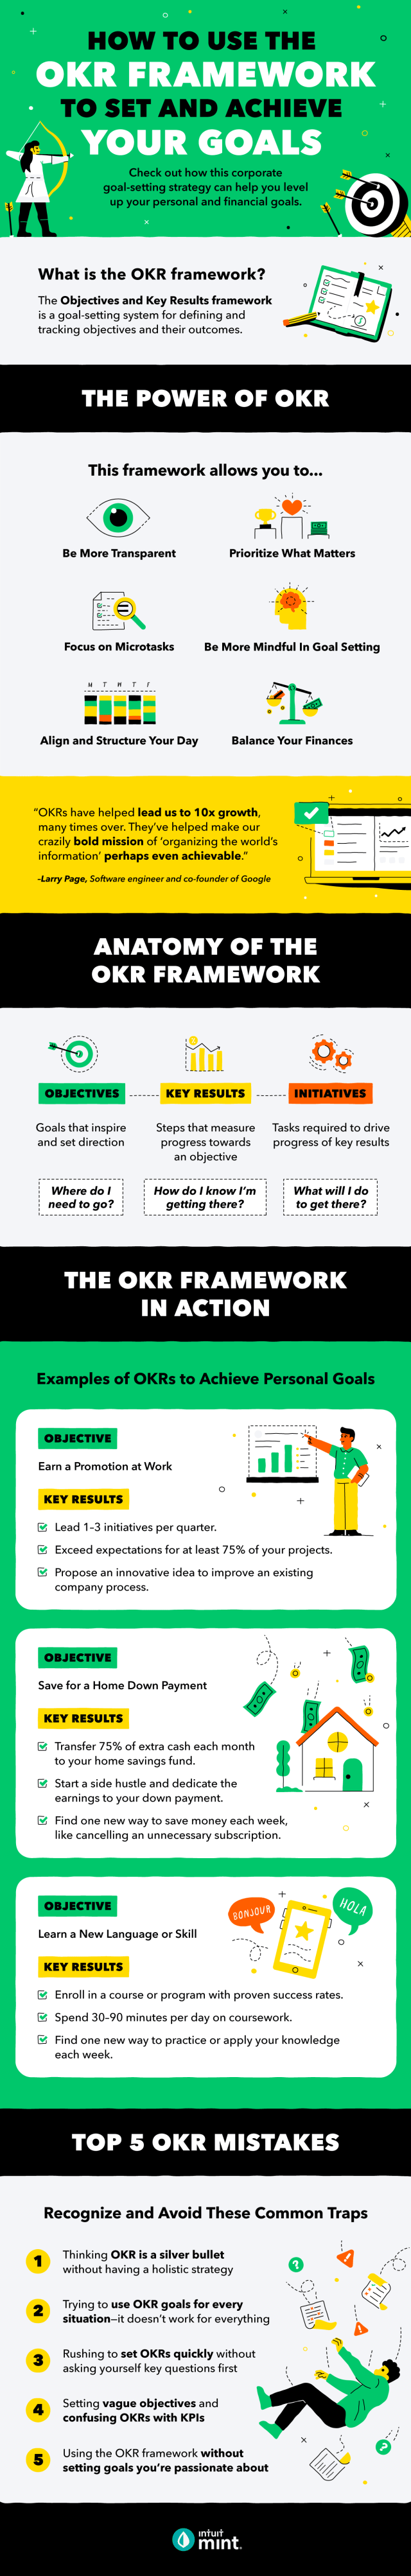 How to Use the OKR Framework To Set and Achieve Your Goals